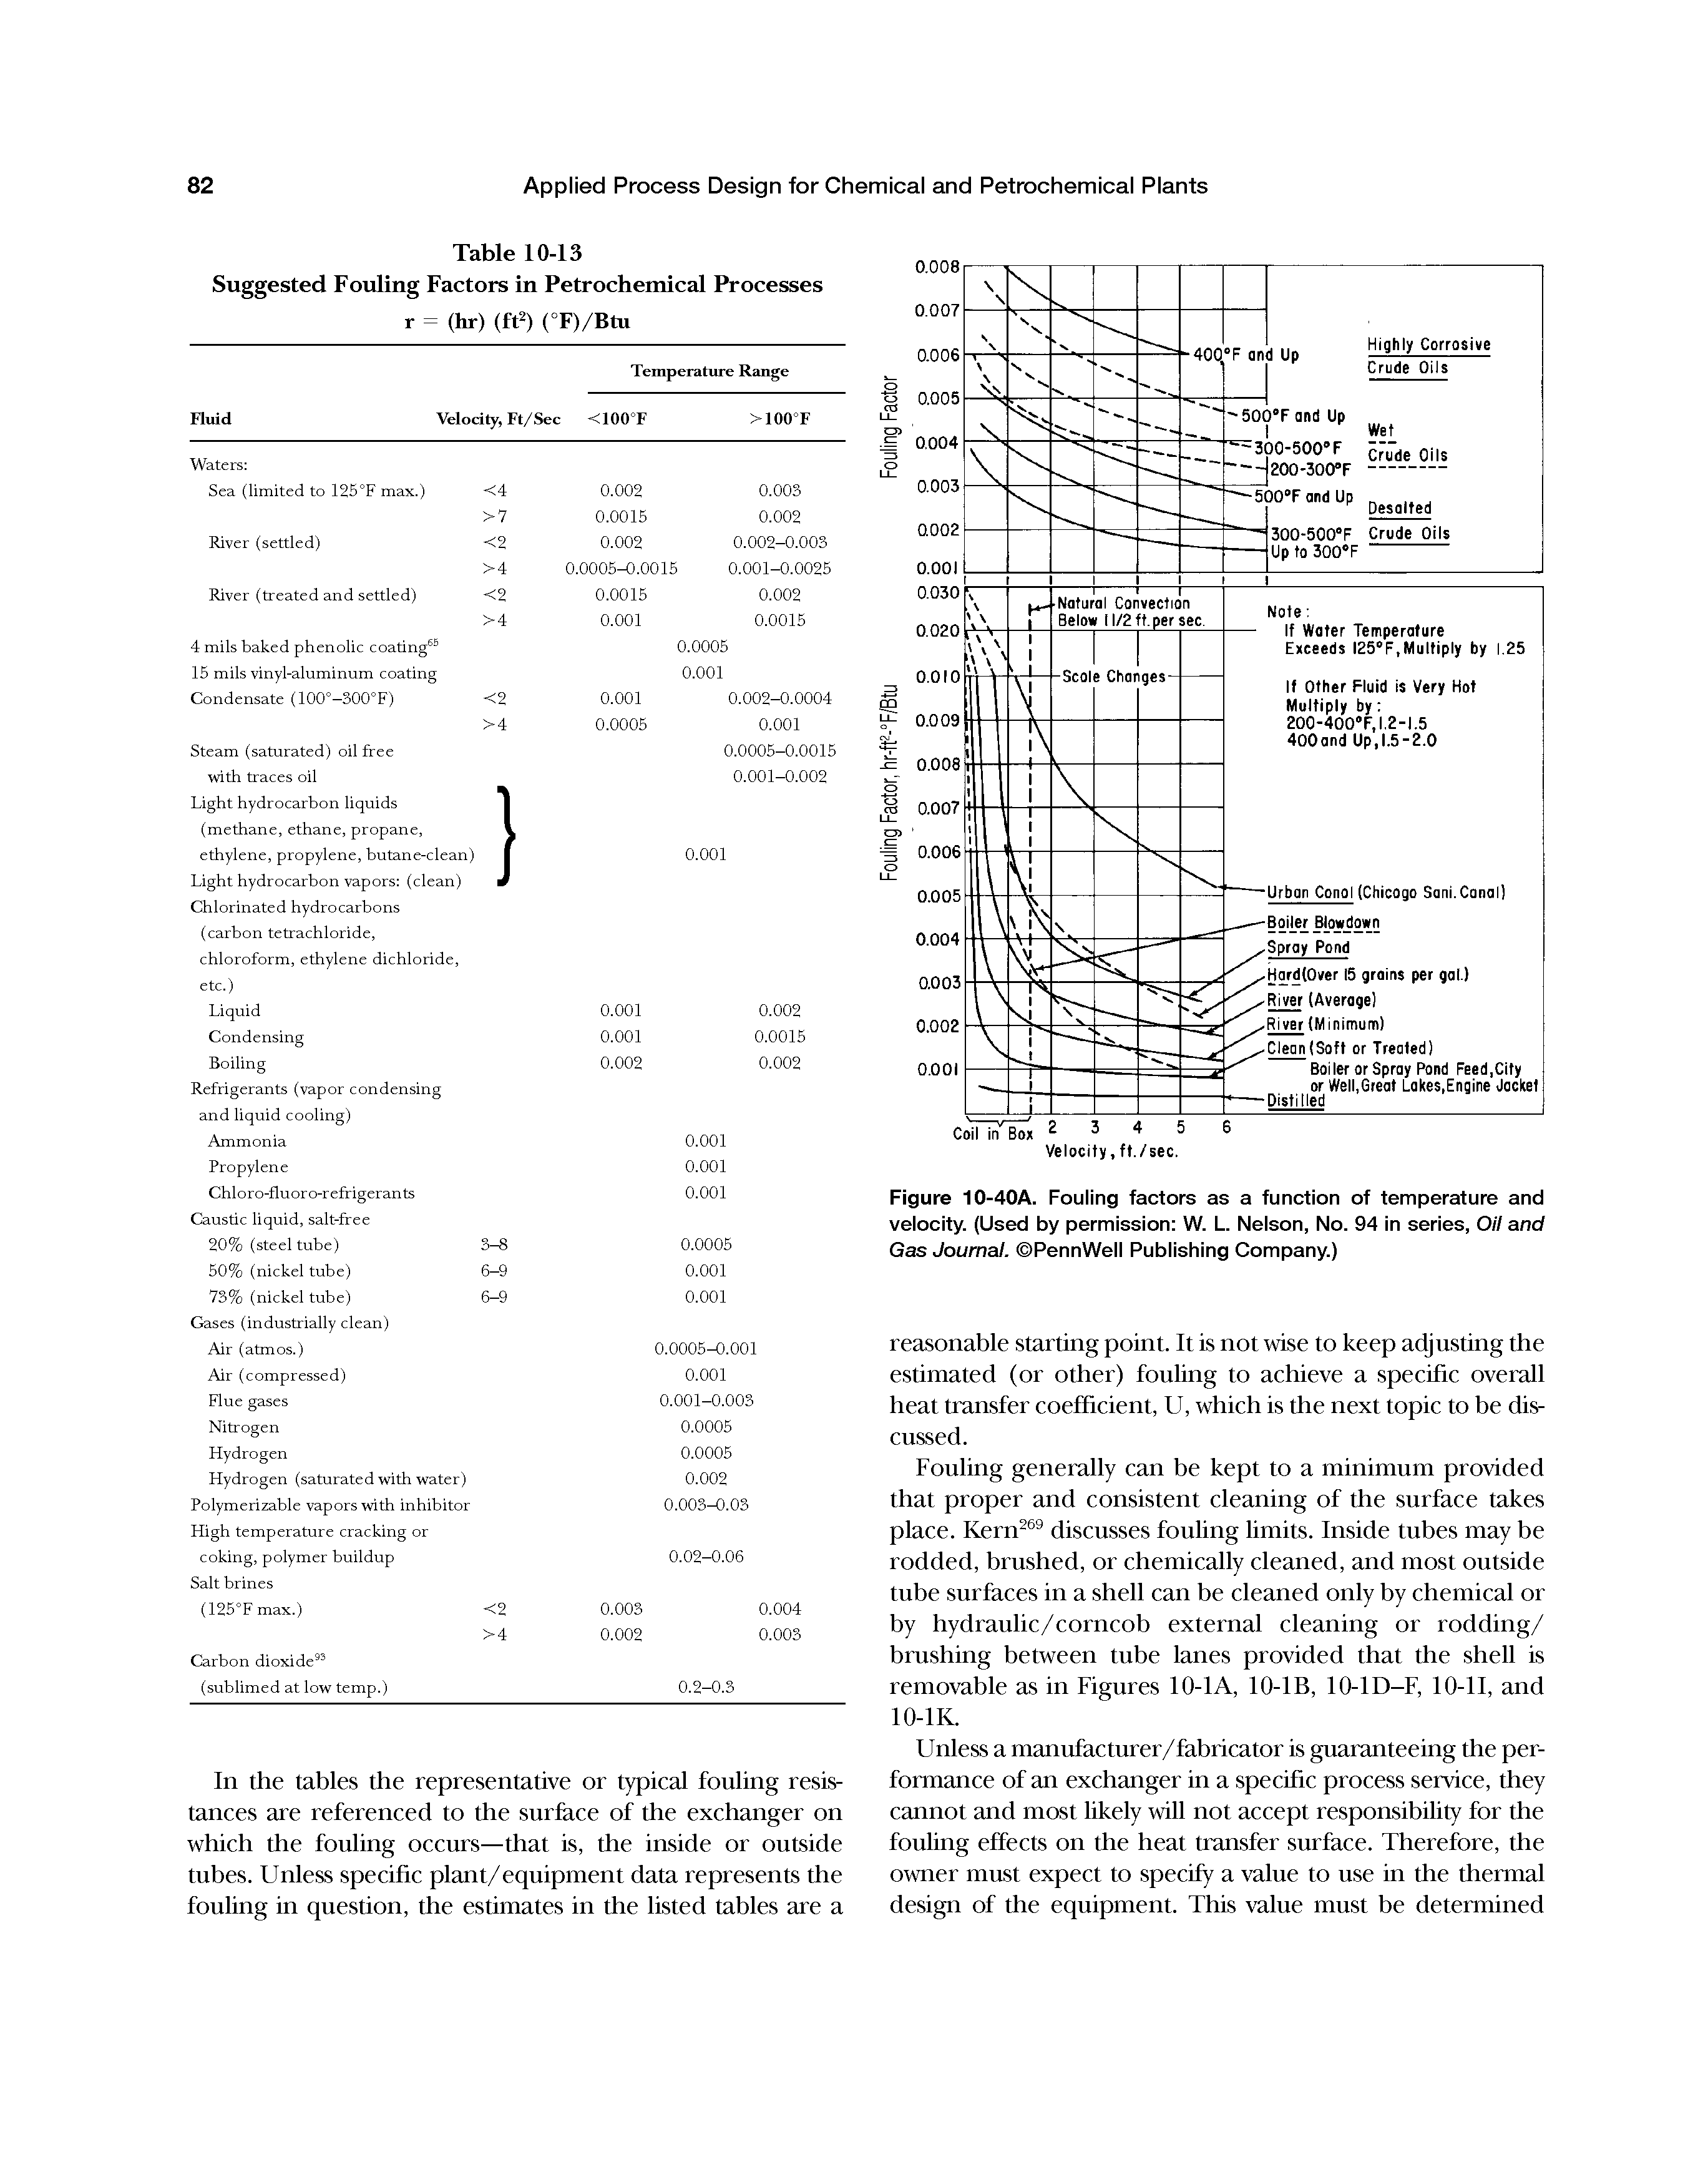 Figure 10-40A. Fouling factors as a function of temperature and velocity. (Used by permission W. L. Nelson, No. 94 in series, Oil and Gas Journal. PennWell Publishing Company.)...